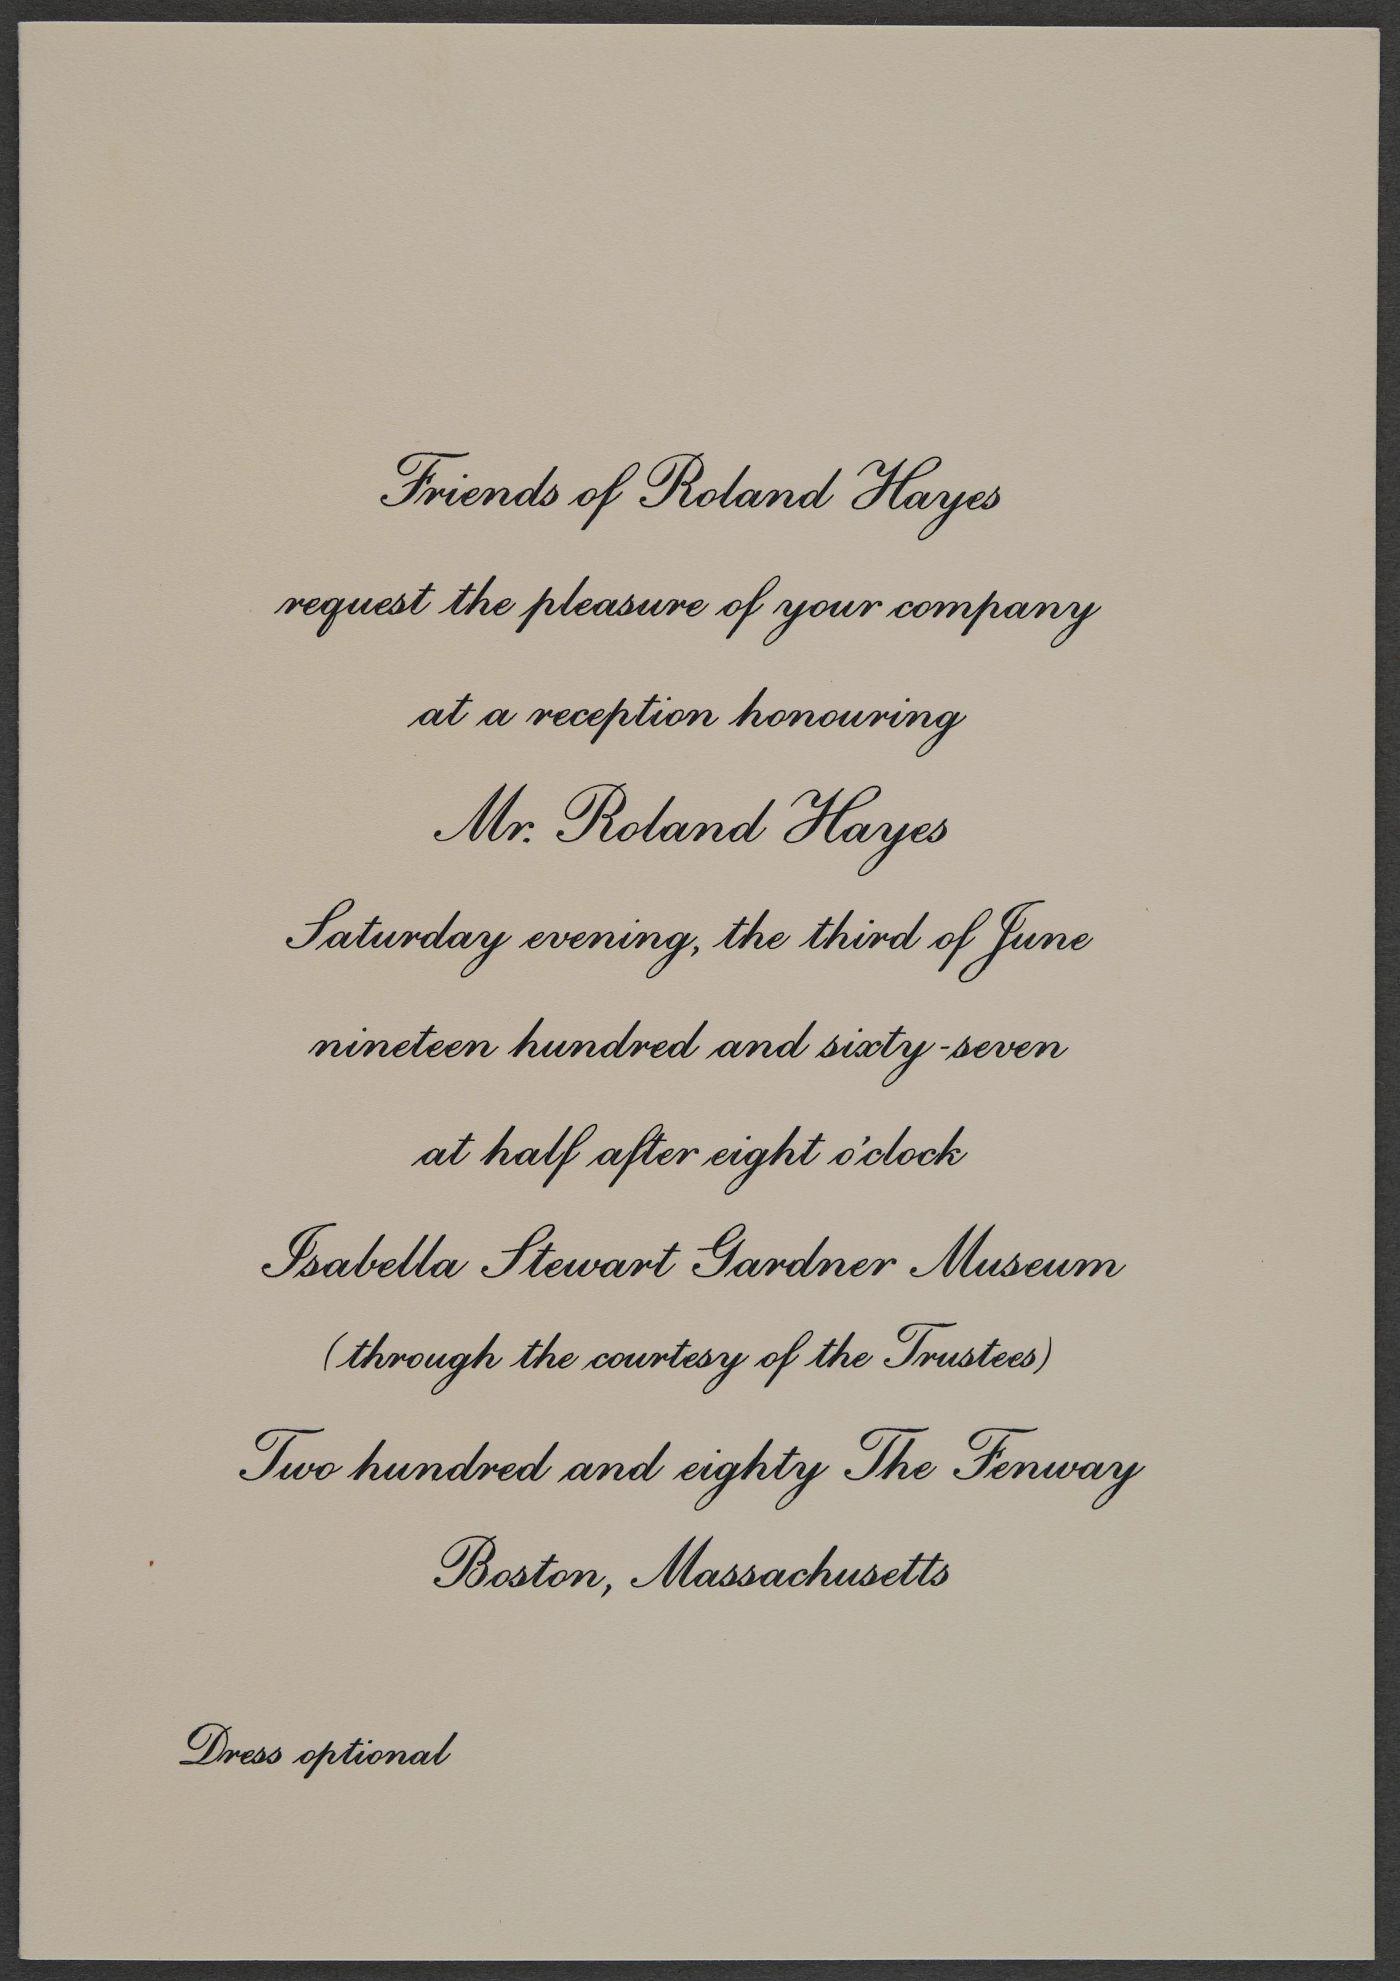 Formal printed invitation to the Roland Hayes birthday celebration at the Gardner Museum.